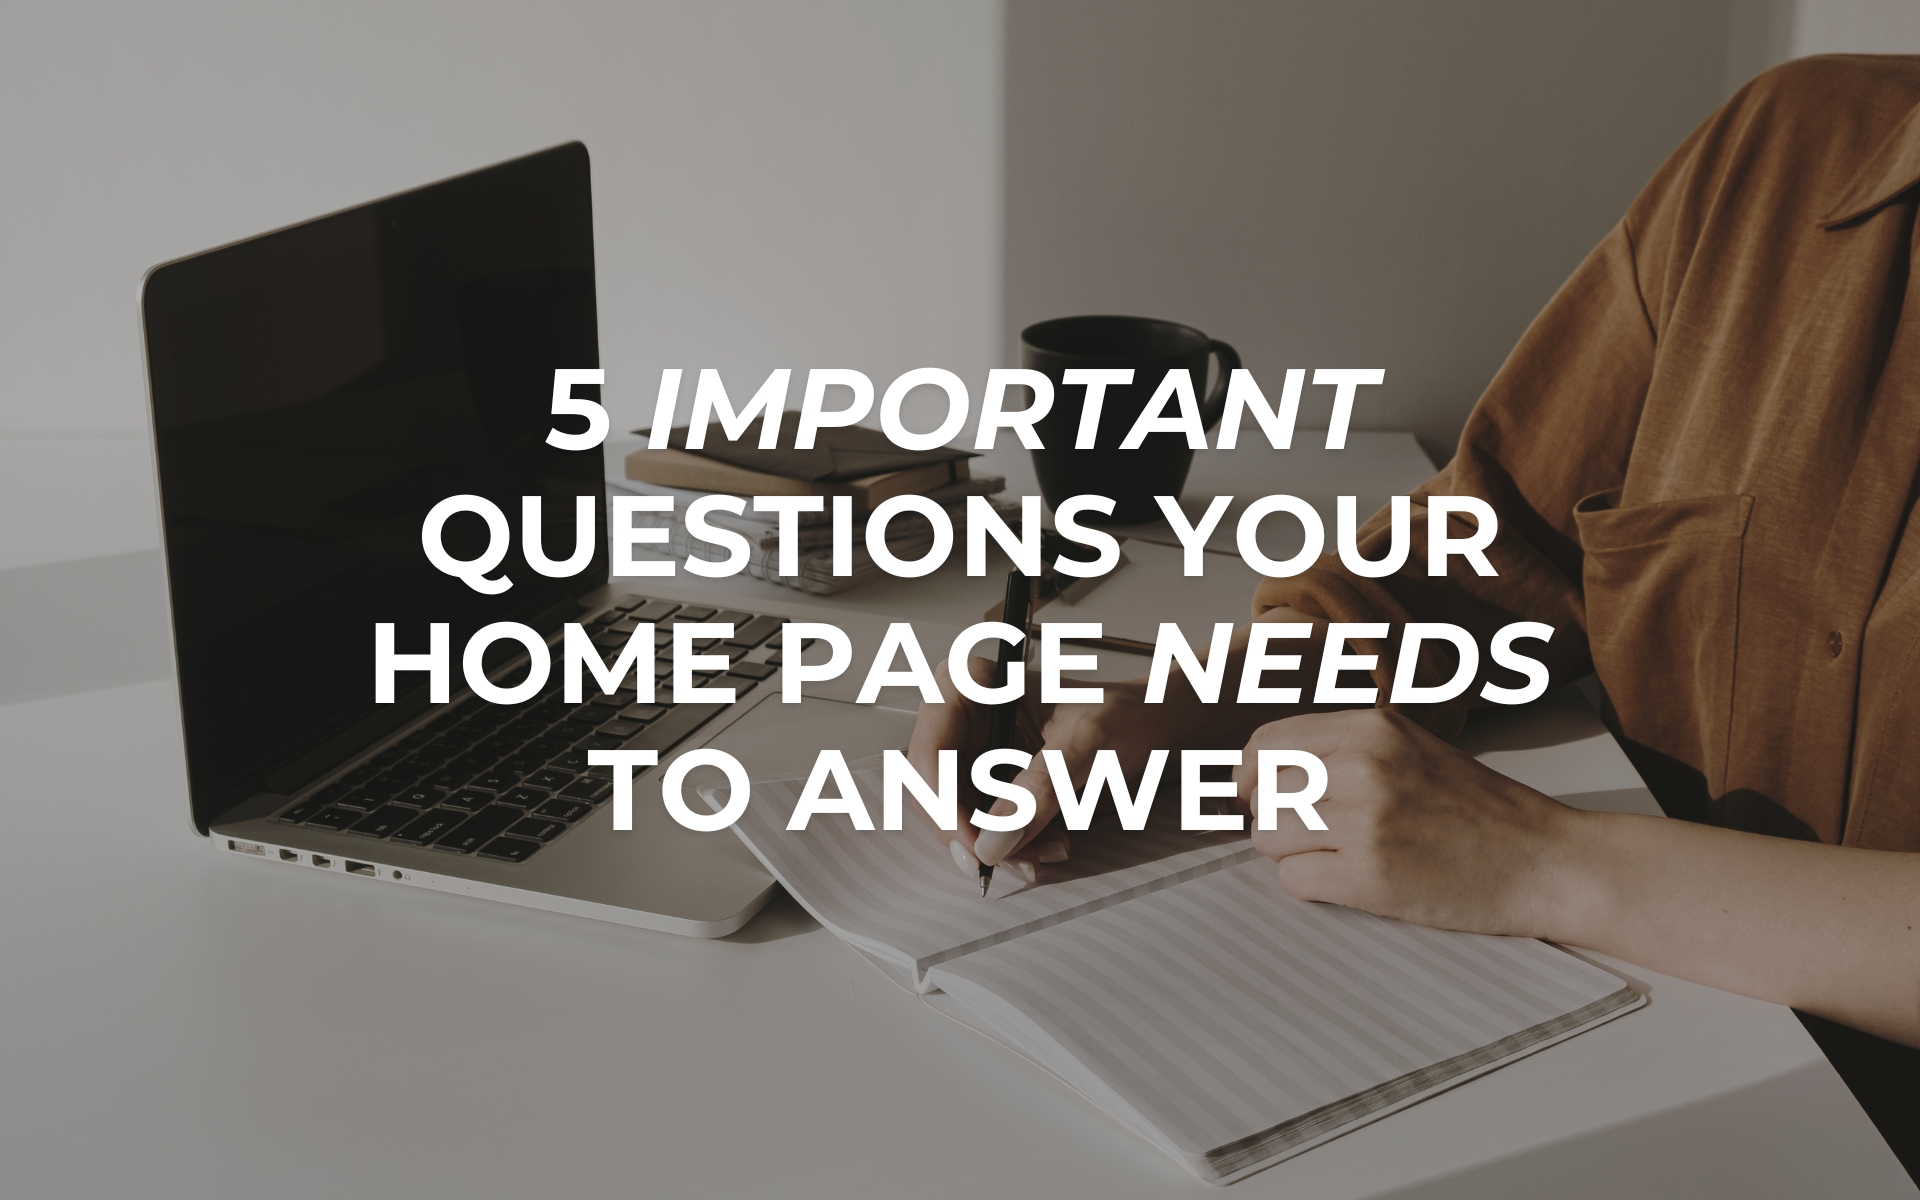 5 Important questions your Home Page needs to answer